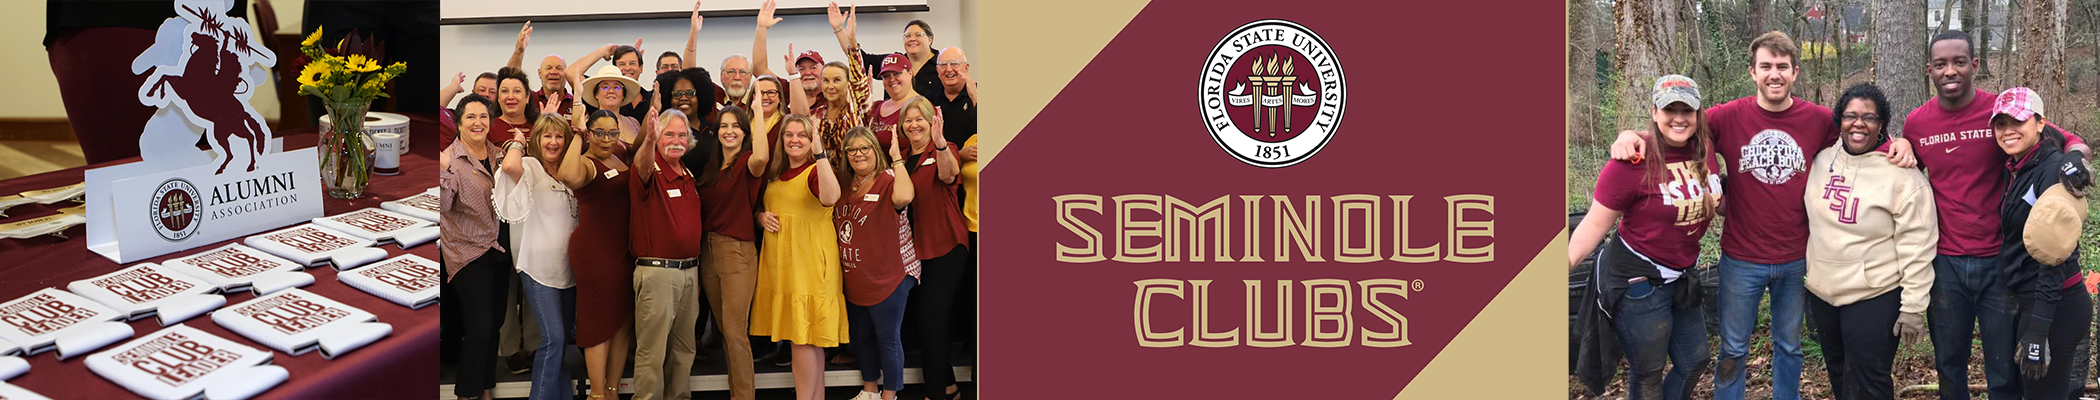 Seminole Clubs logo with pictures from past events